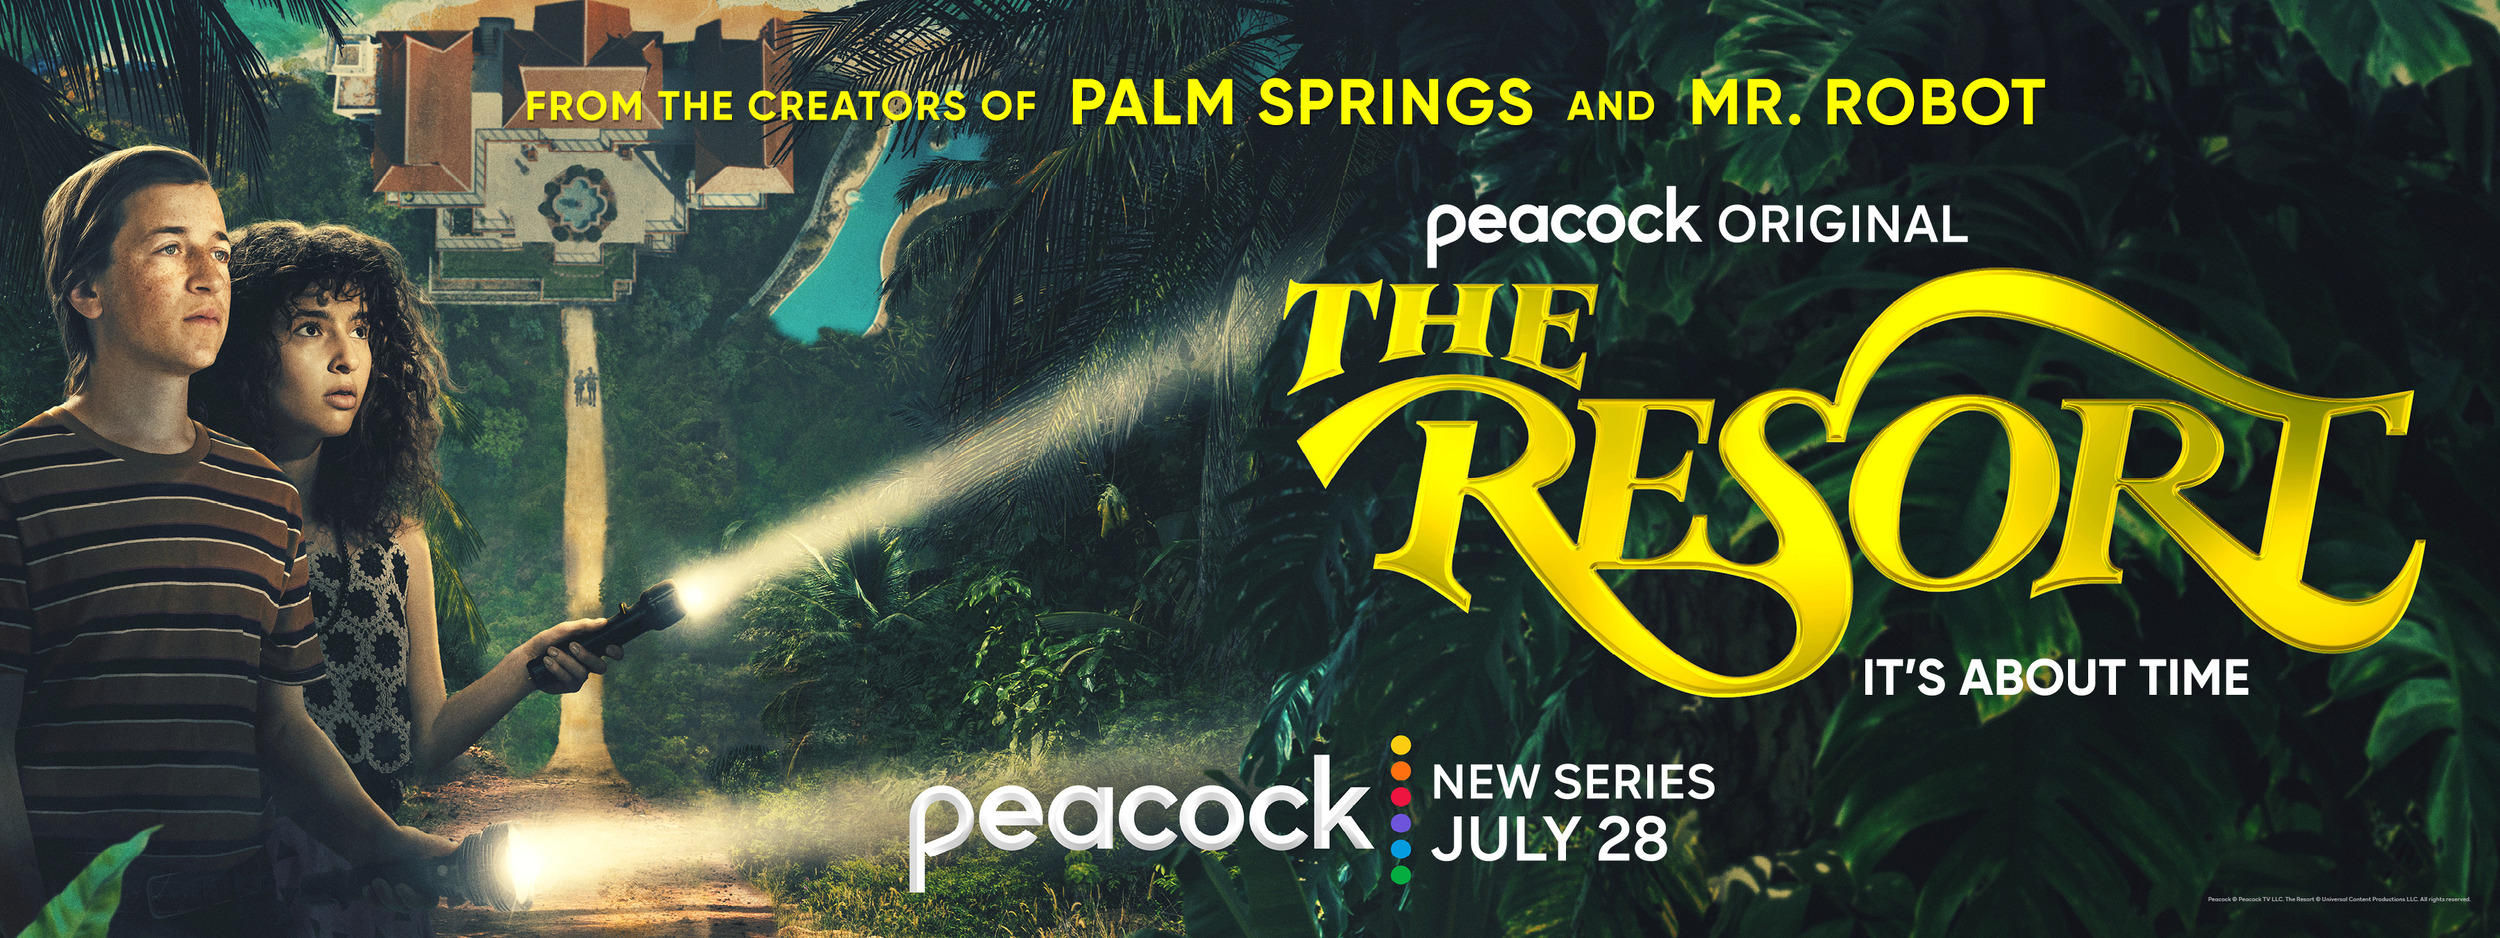 Mega Sized Movie Poster Image for The Resort (#3 of 4)